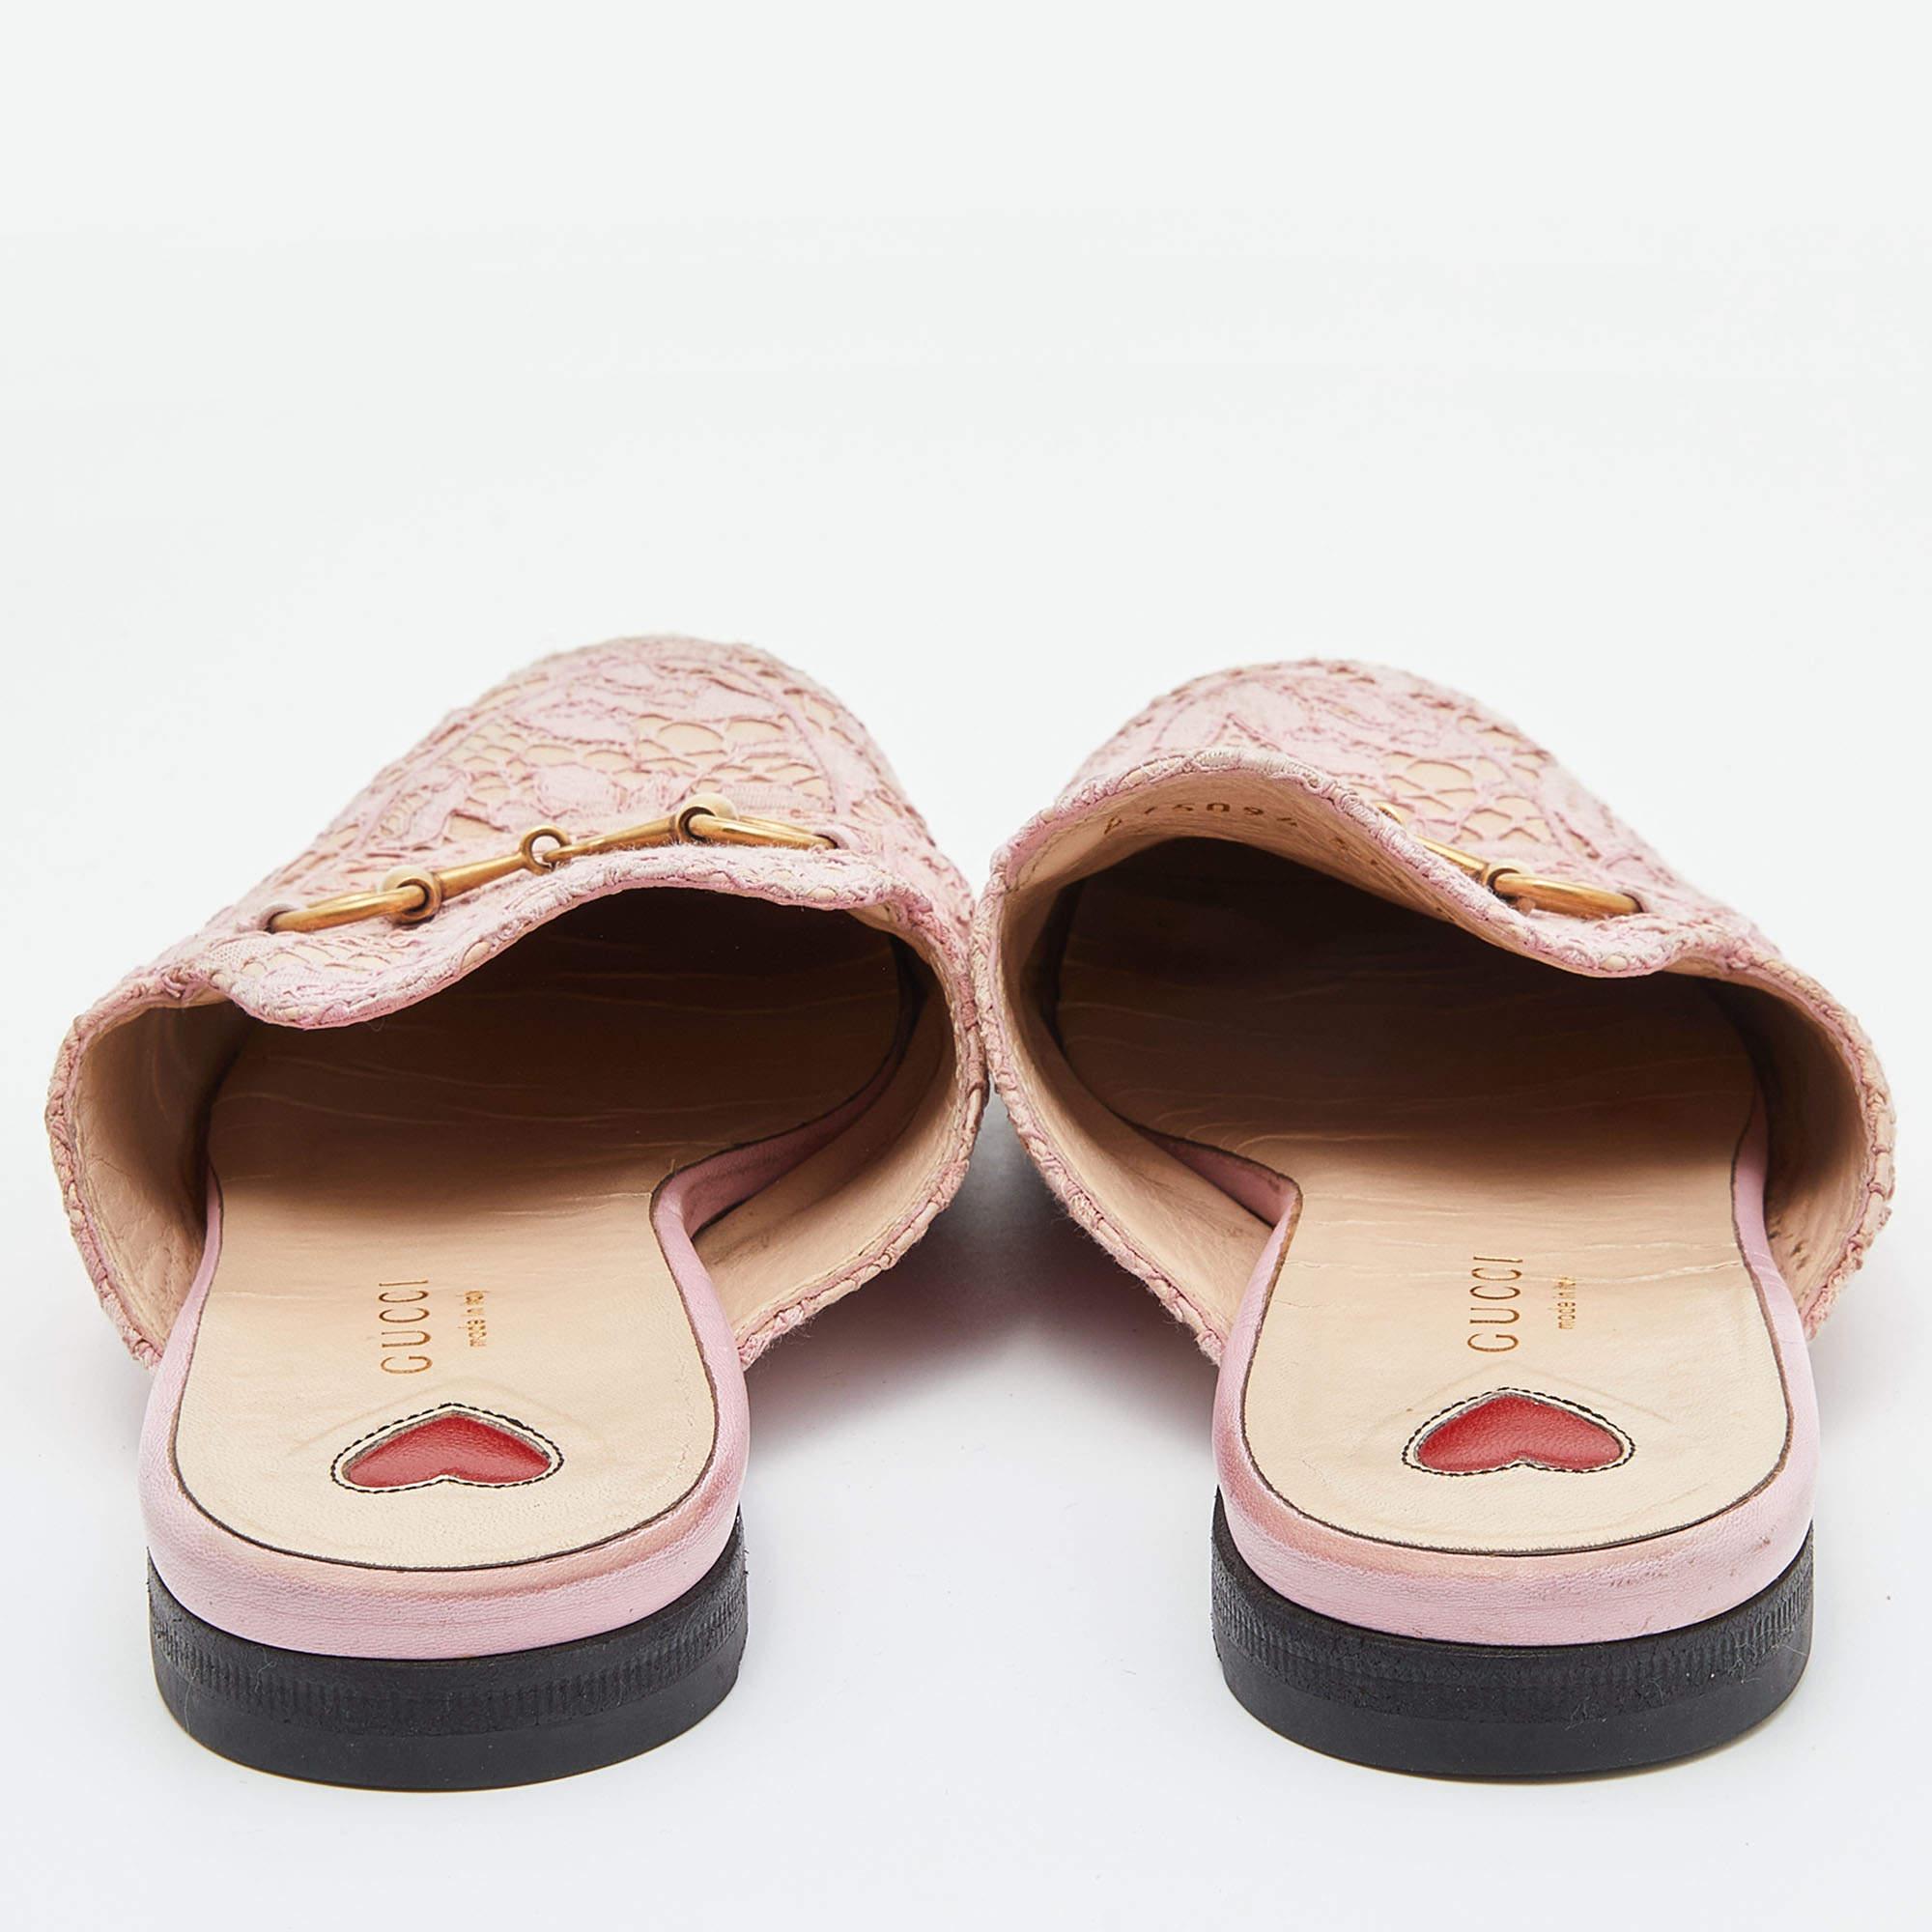 Beige Gucci Pink Floral Lace and Leather Princetown Flat Mule Size 37.5 For Sale